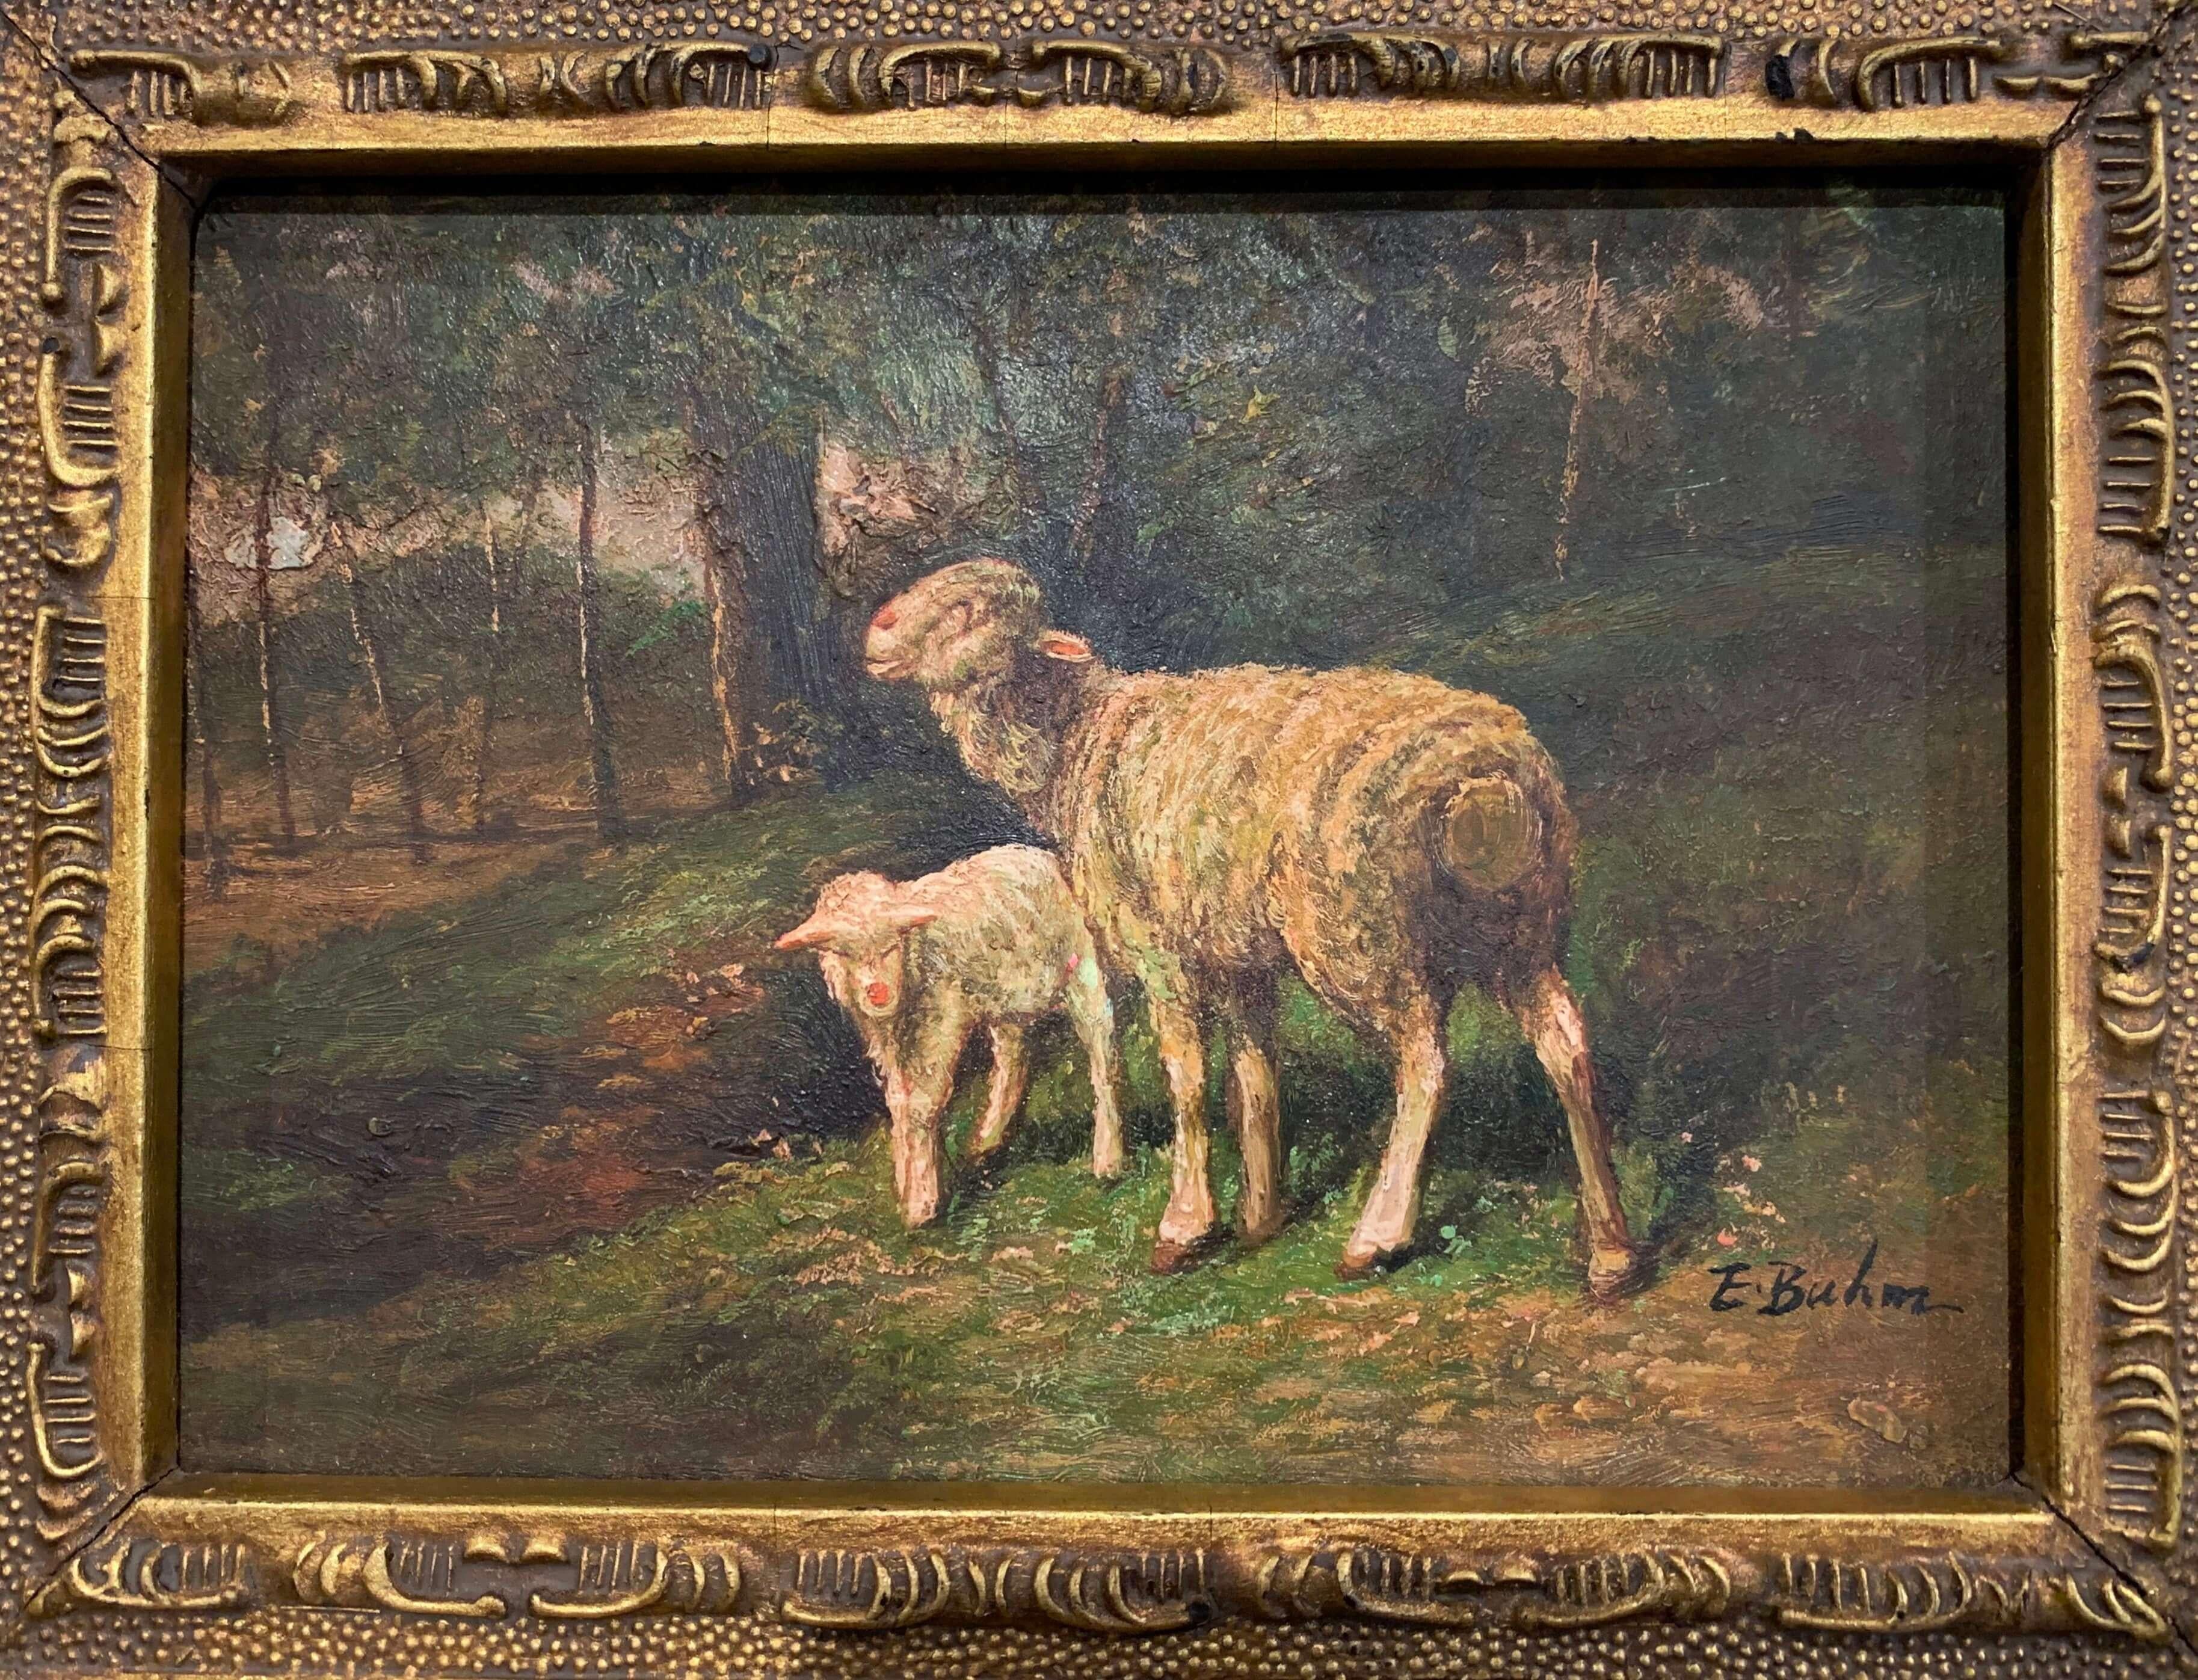 This antique sheep oil painting on board was created in England, circa 1880. The bucolic composition is set in its original, carved gilt frame, which is labeled with provenance on the back for further authentication. The Classic subject matter